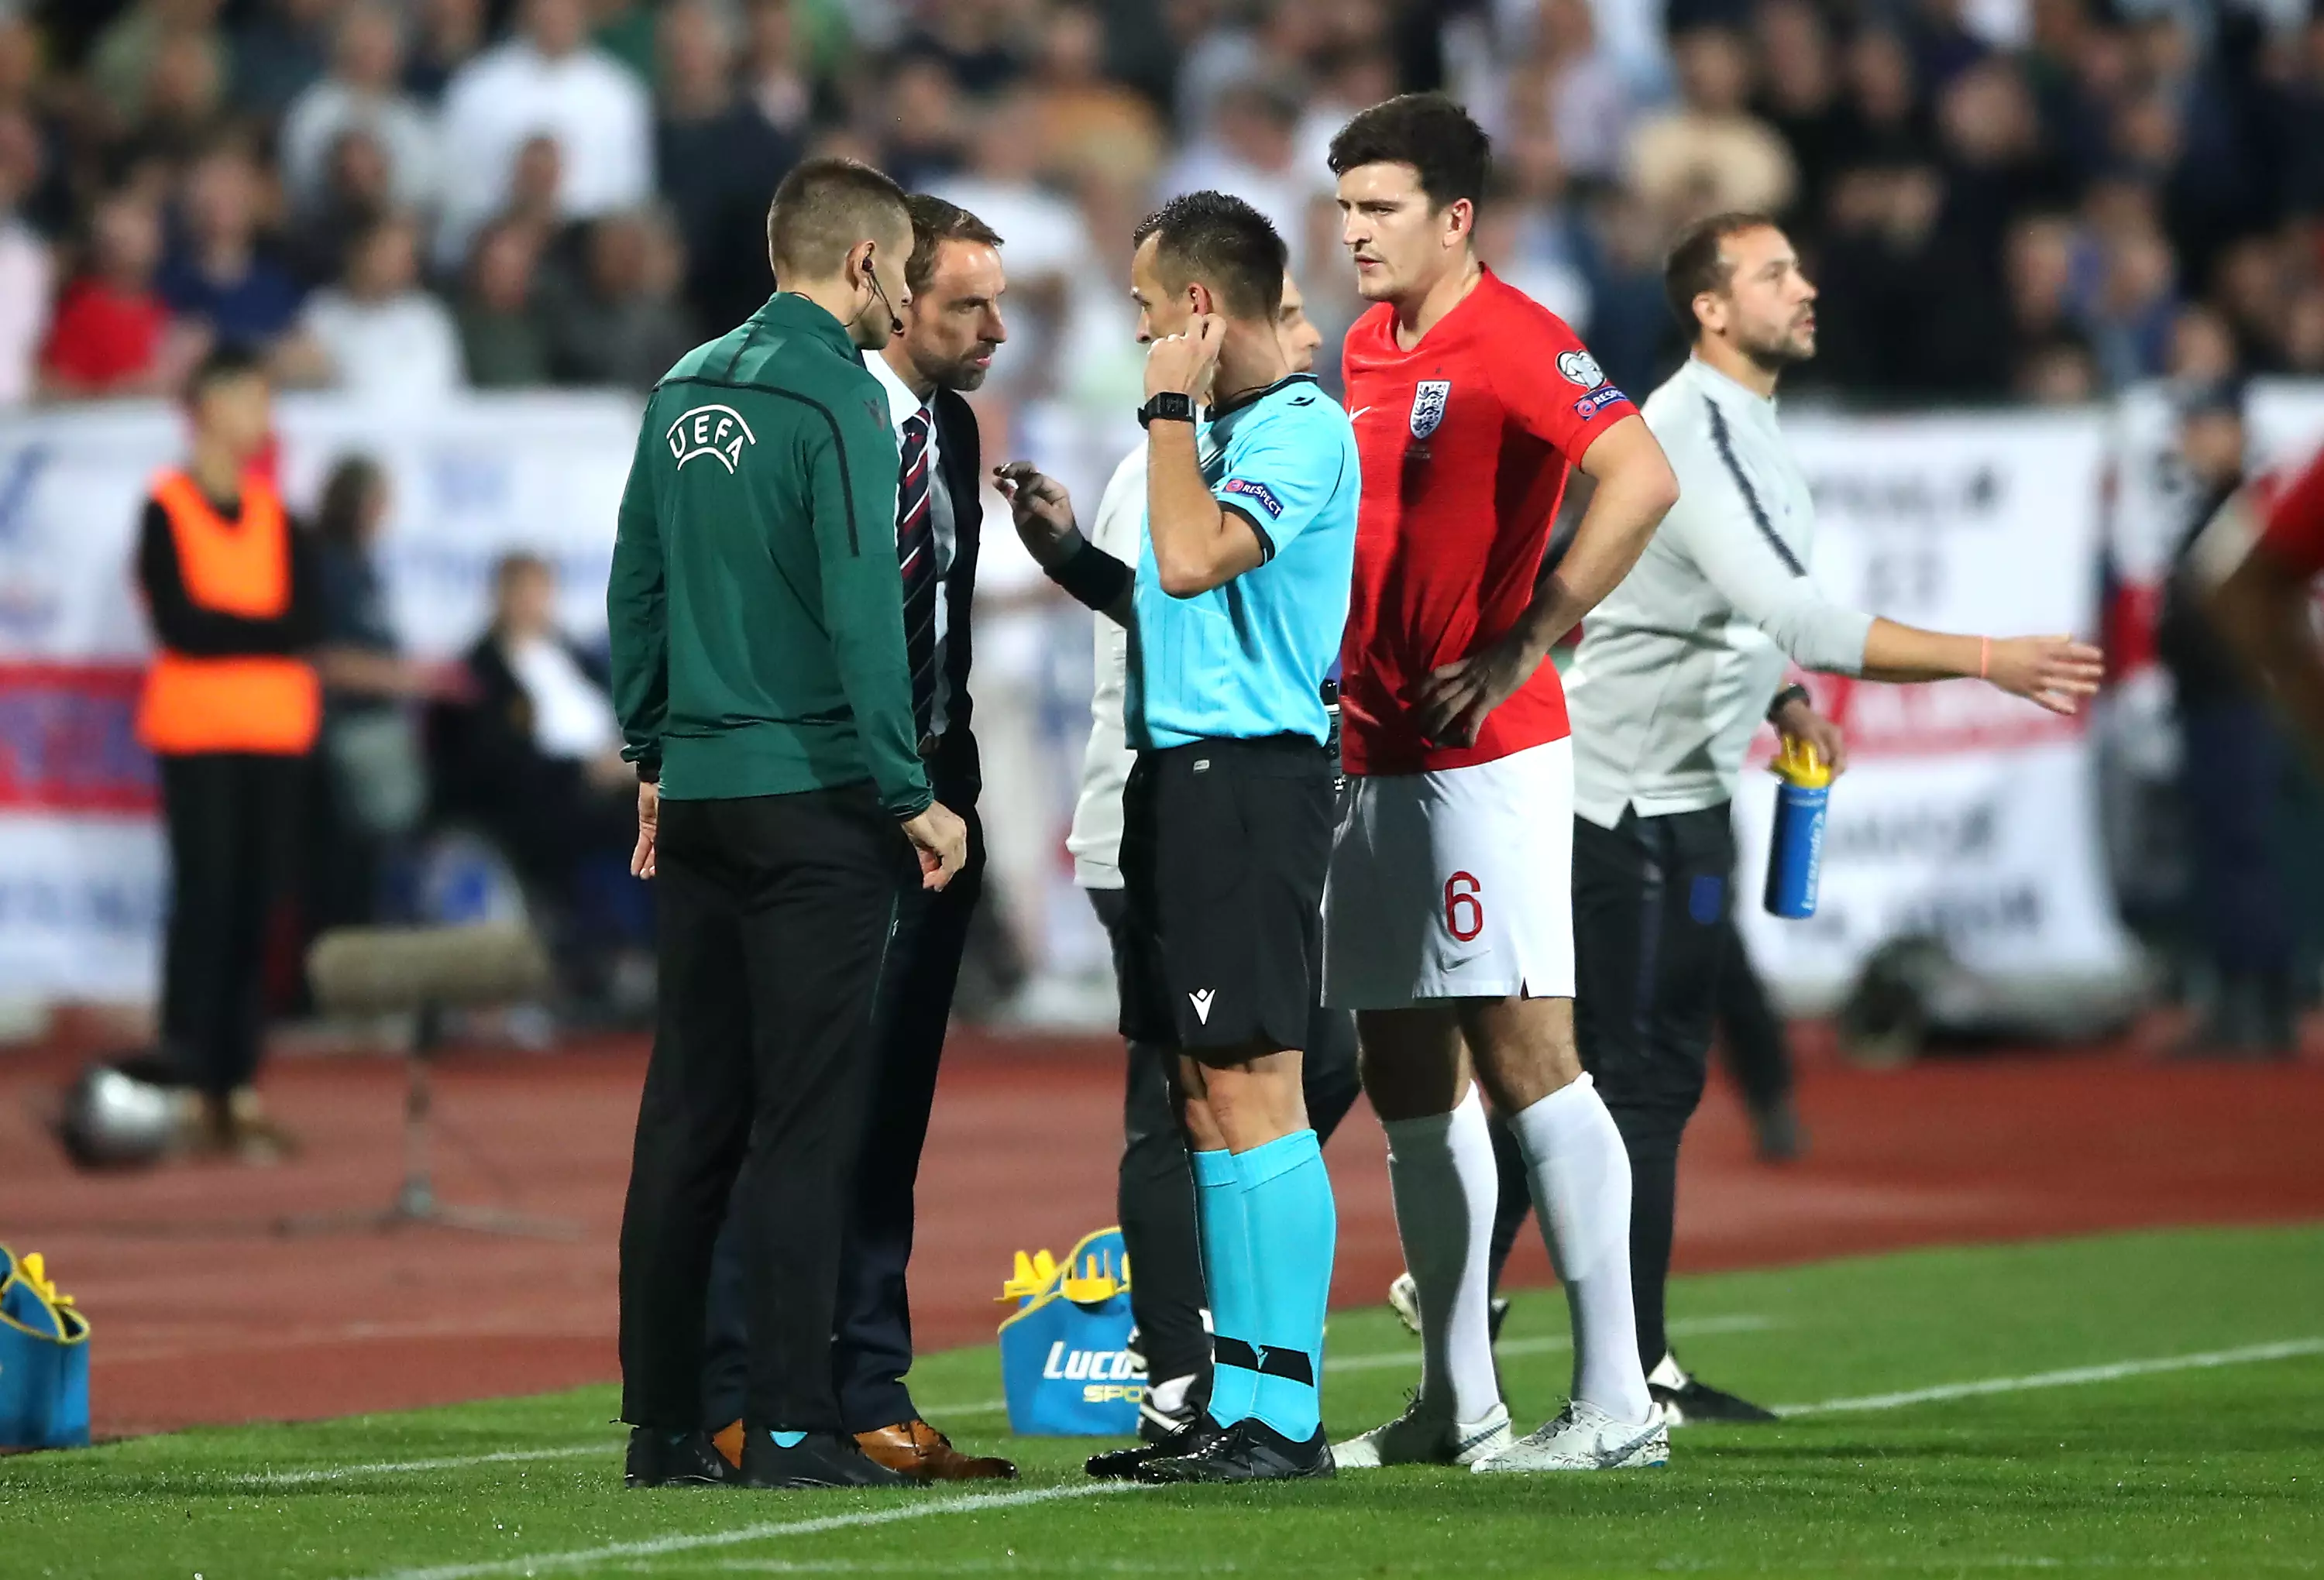 The referee talks to Gareth Southgate after stopping the game. Image: PA Images